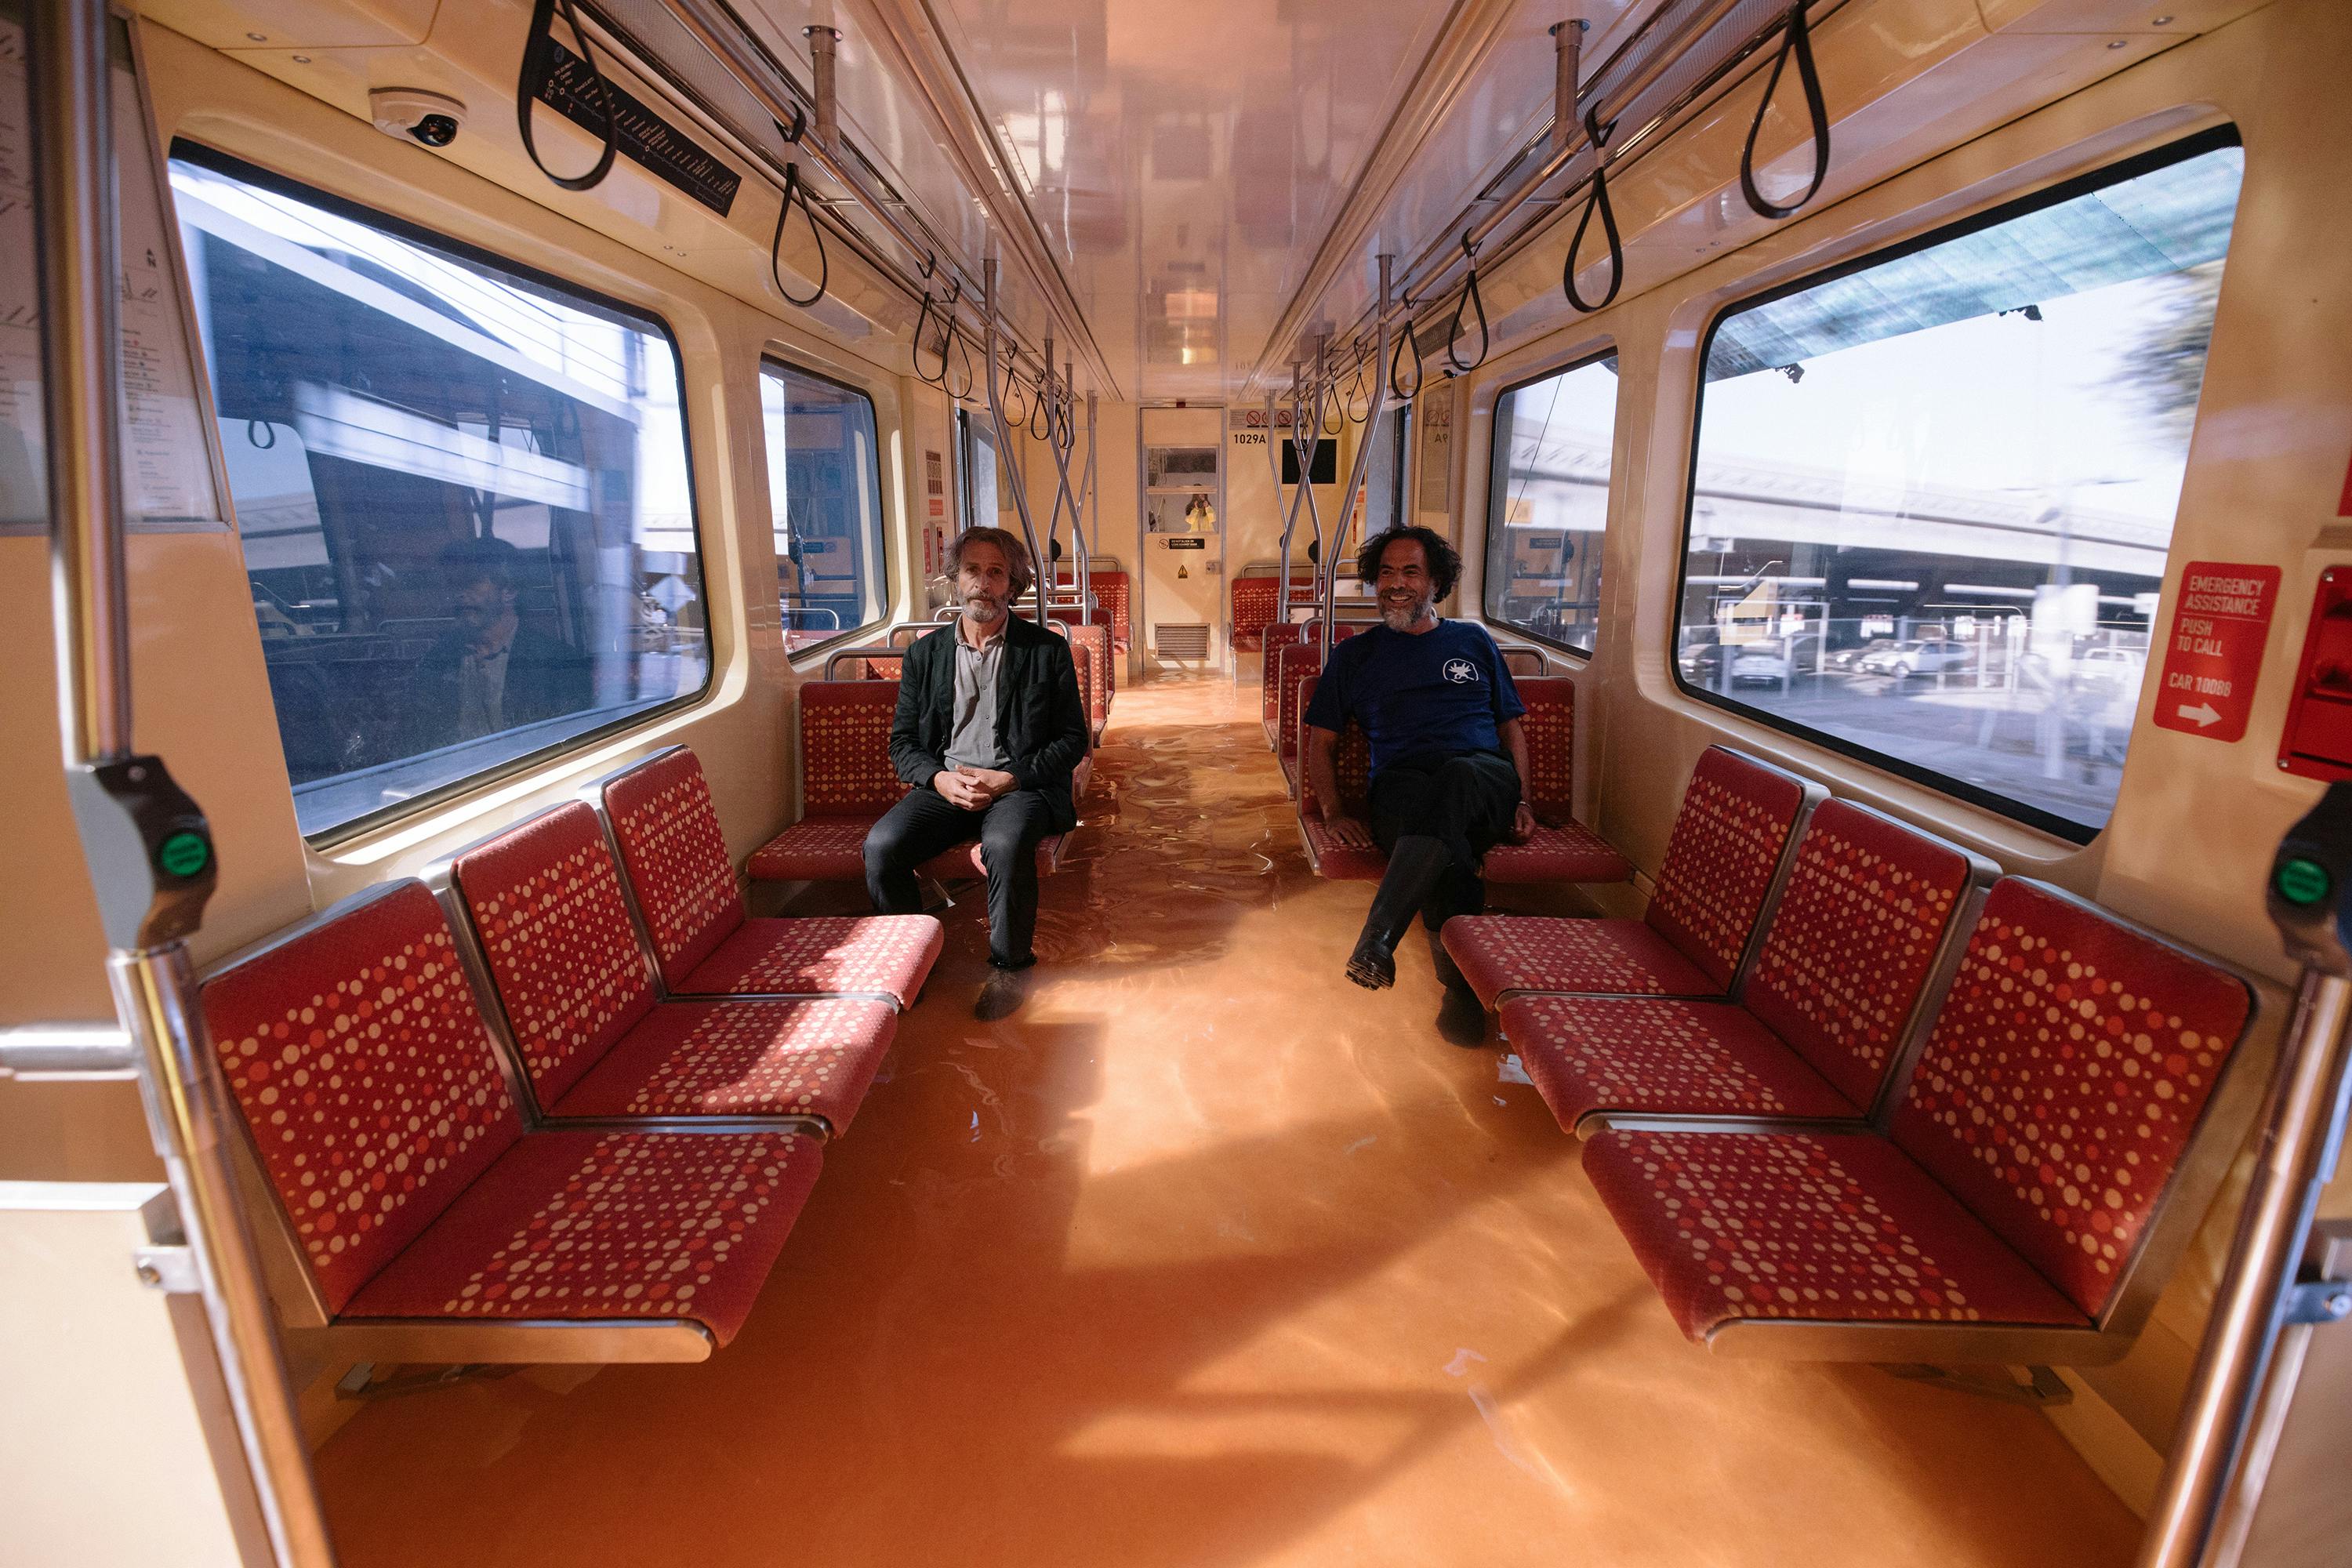 Daniel Giménez Cacho and Alejandro G. Iñárritu sit on a bus together. The bus is lined with red cushioned benches.